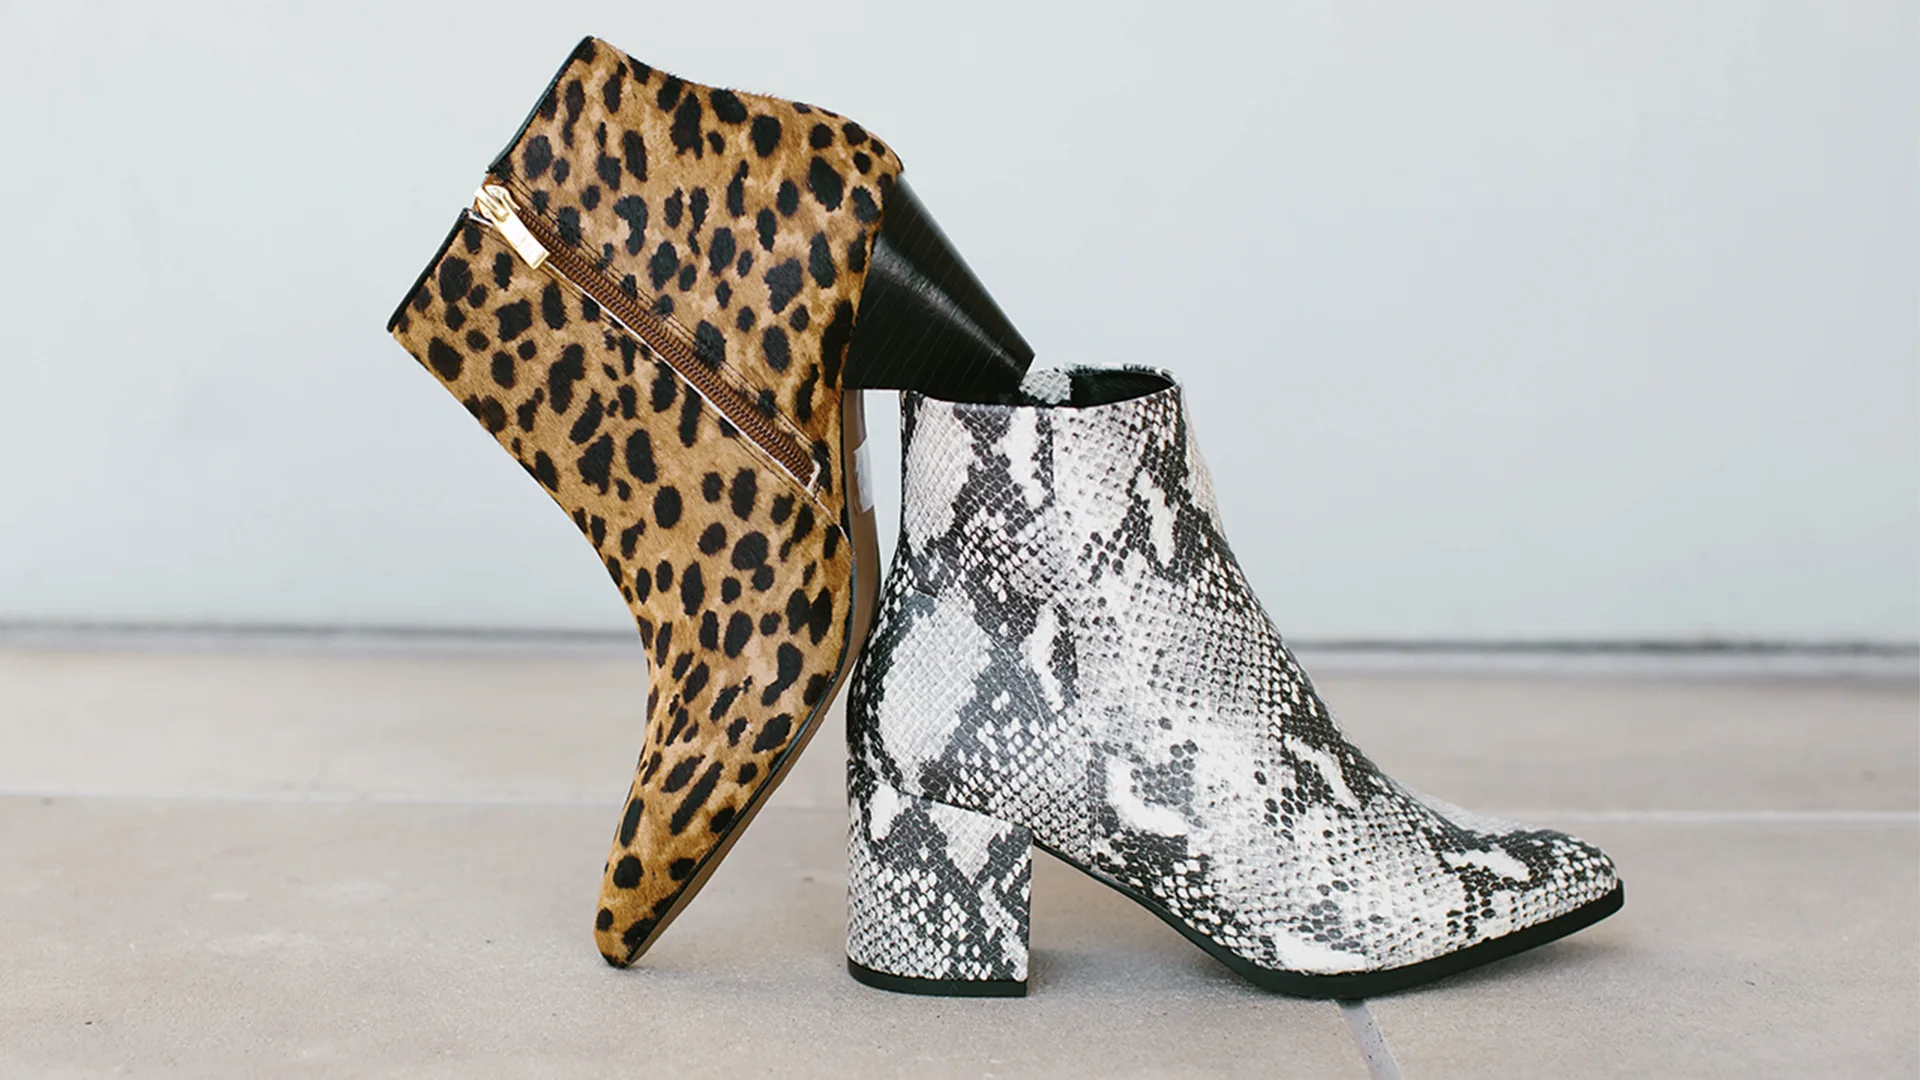 Leopard print and snakeskin boots